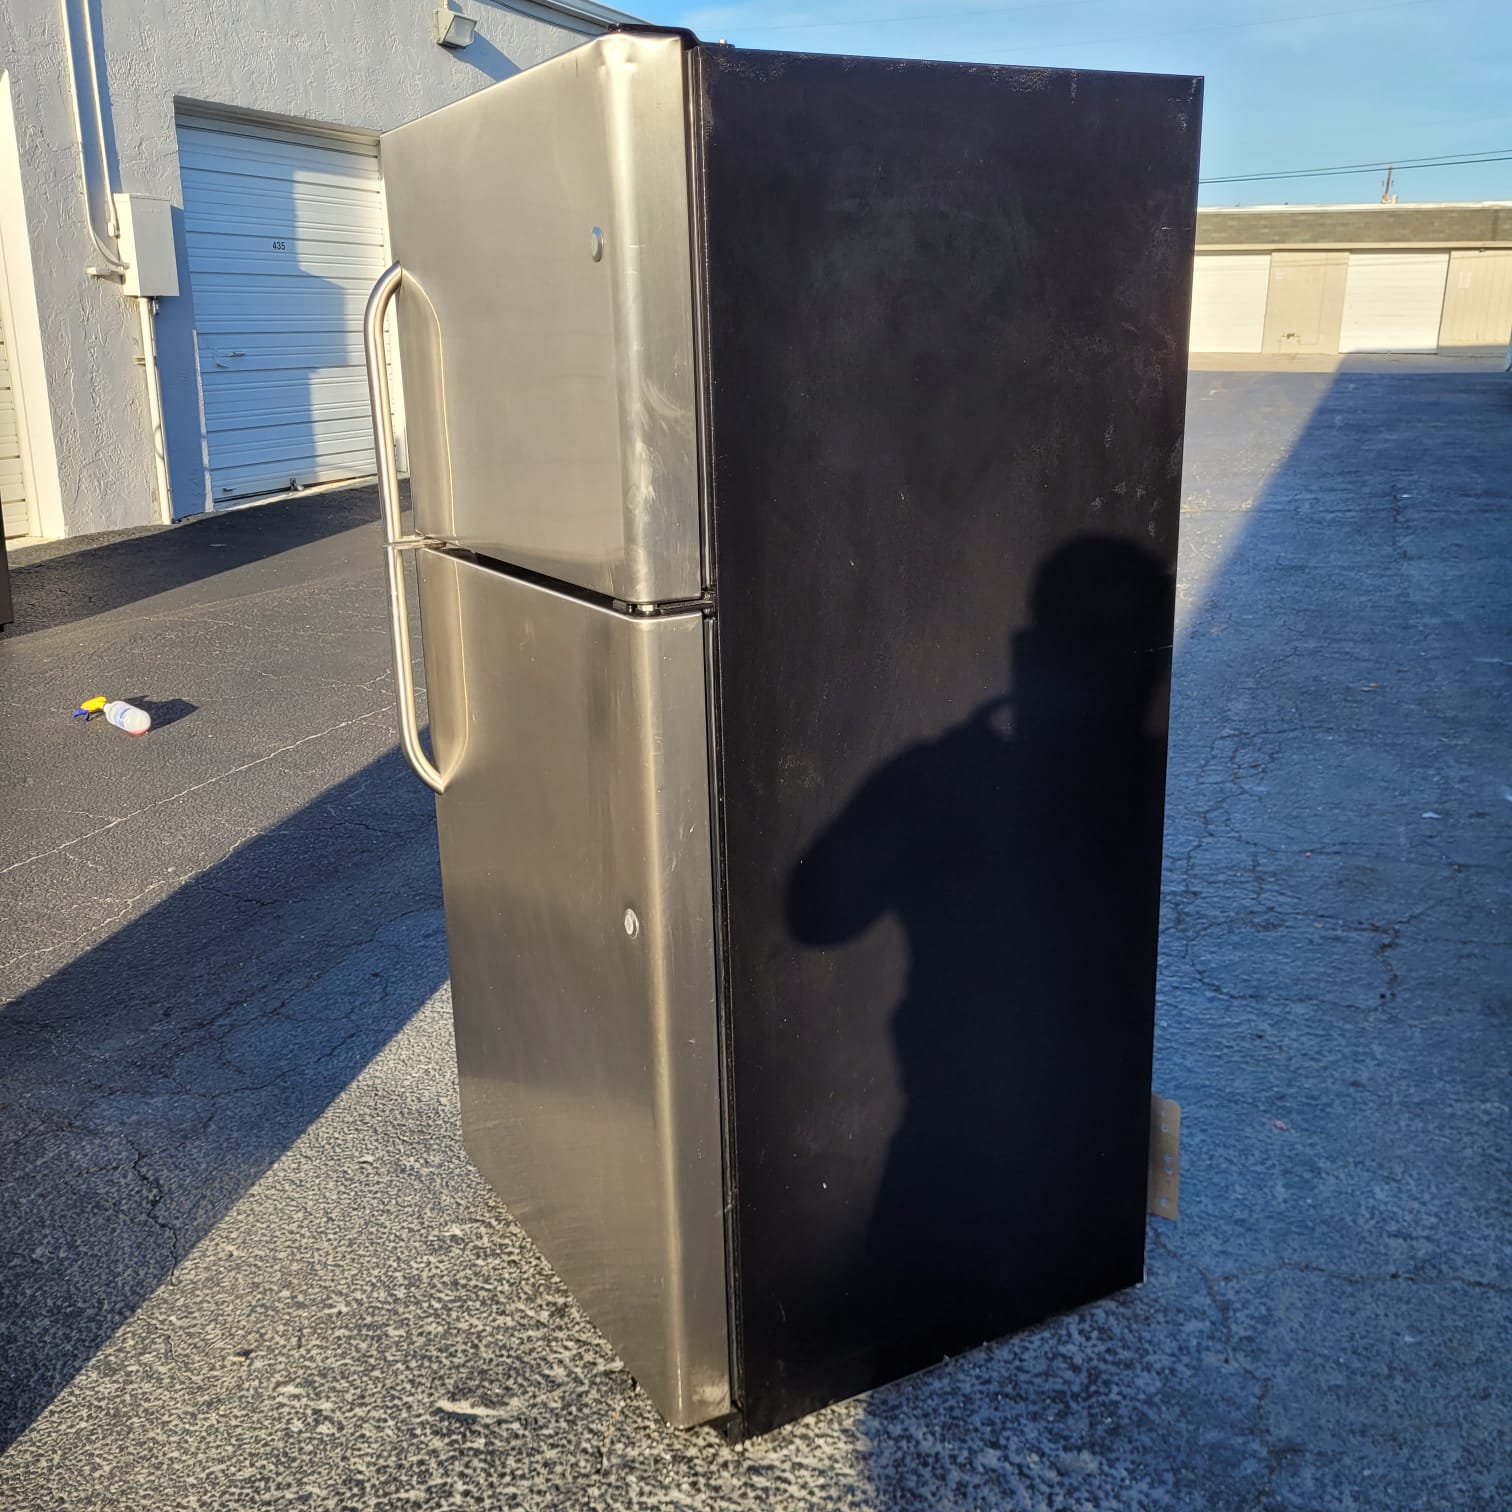 GE Stainless Steel Top and Bottom Refrigerator